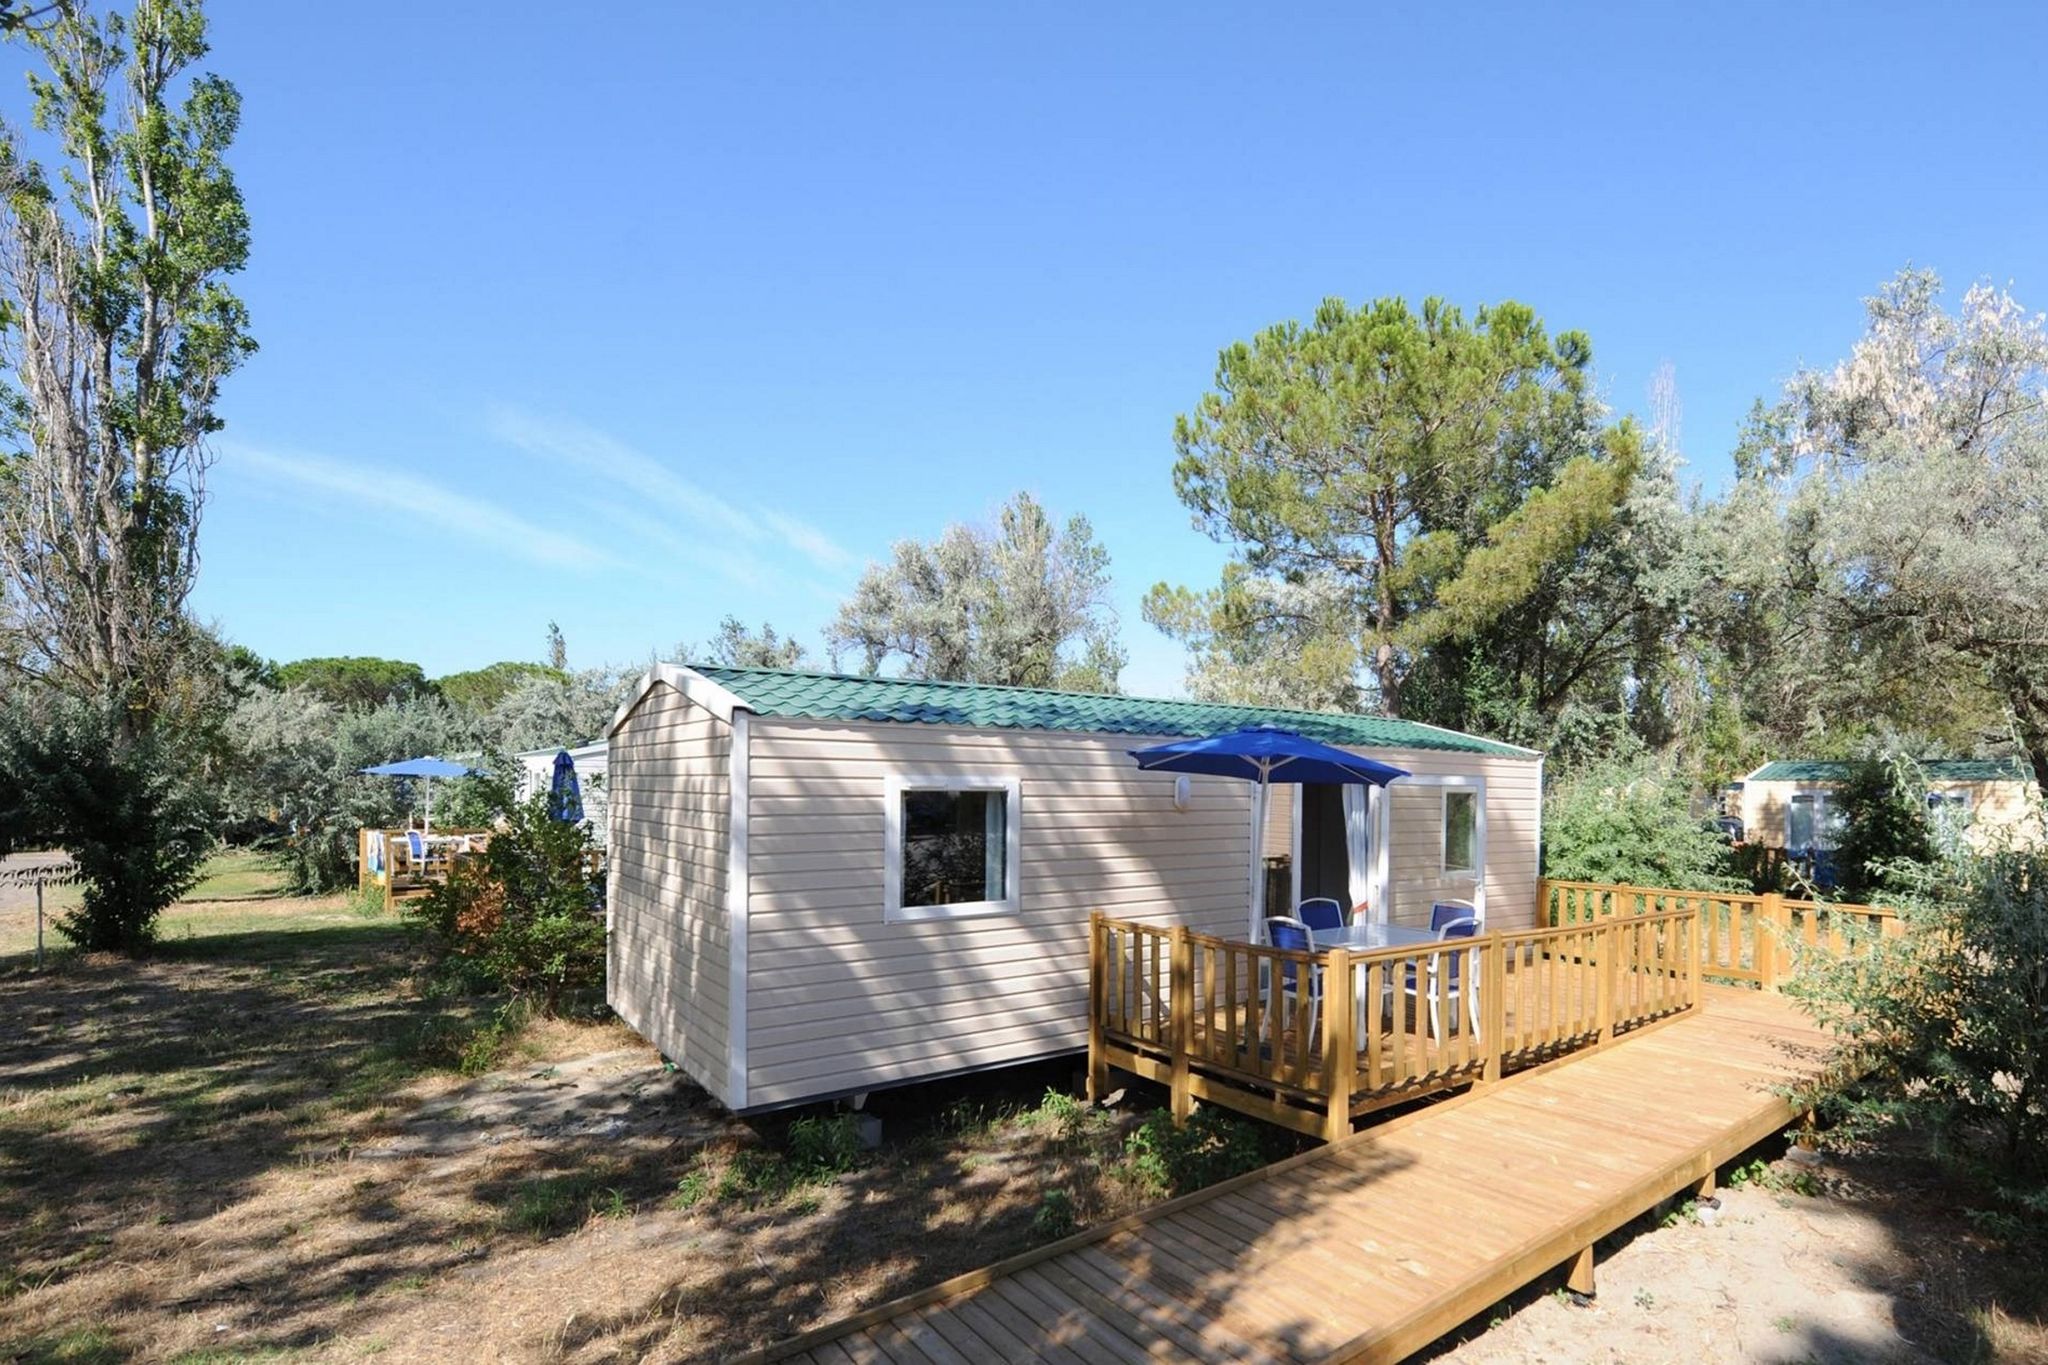 Tranquil mobile home in the quaint, green Camargue surroundings